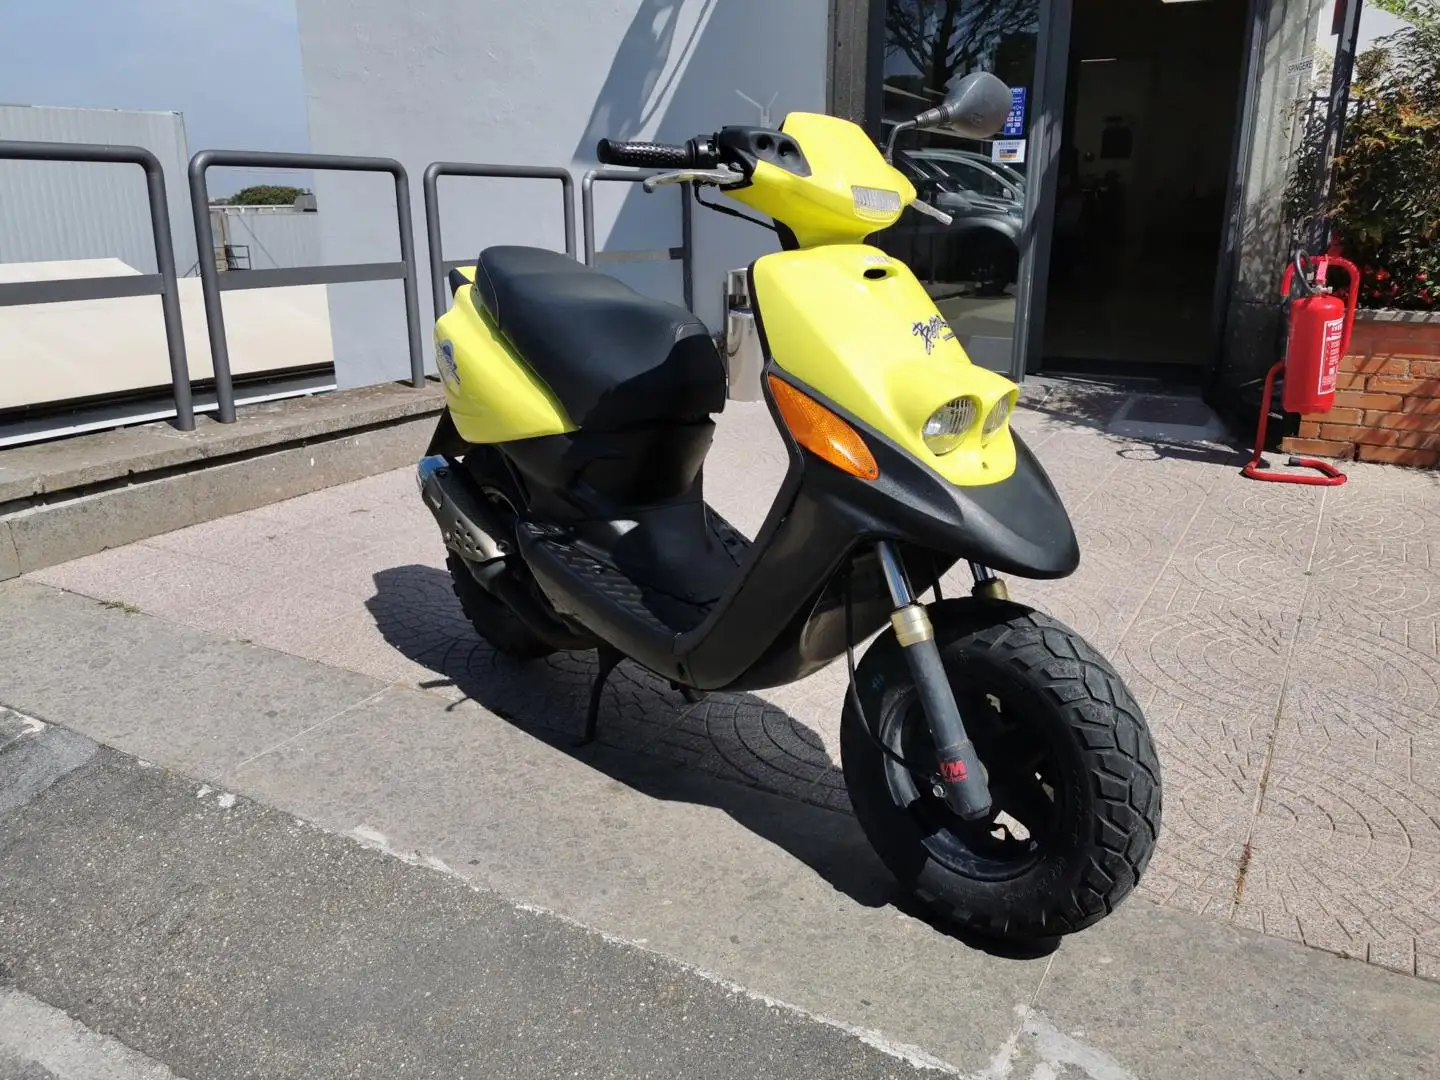 MBK Booster * NEXT GEN * PAT. AM - RATE AUTO MOTO SCOOTER Gold - 2